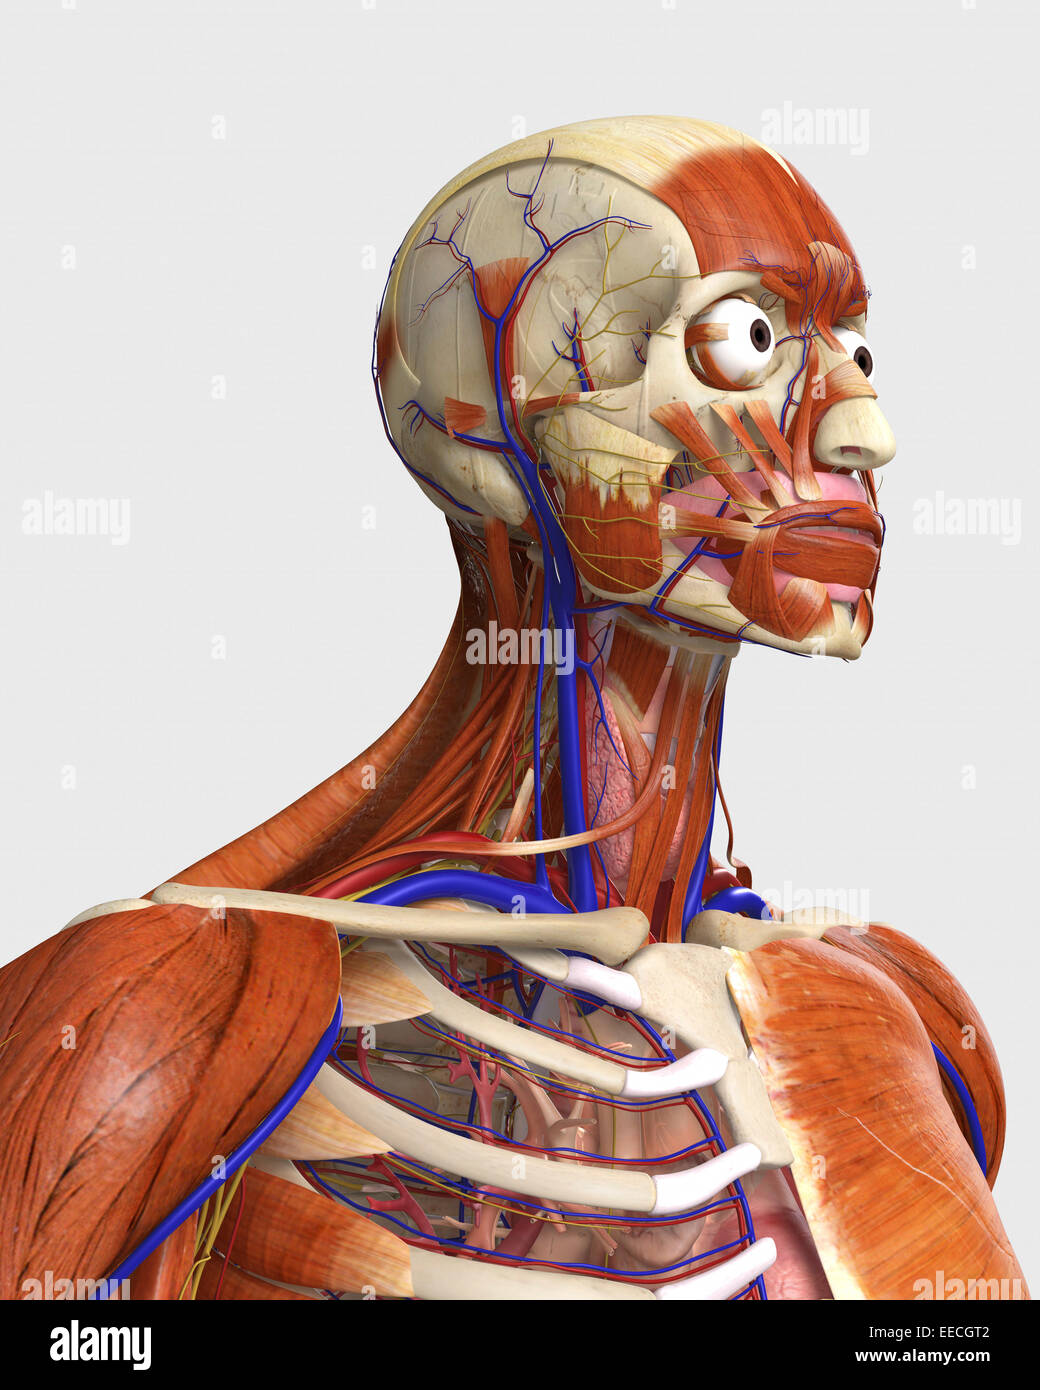 Side view showing human bones with muscles and circulatory system. Stock Photo